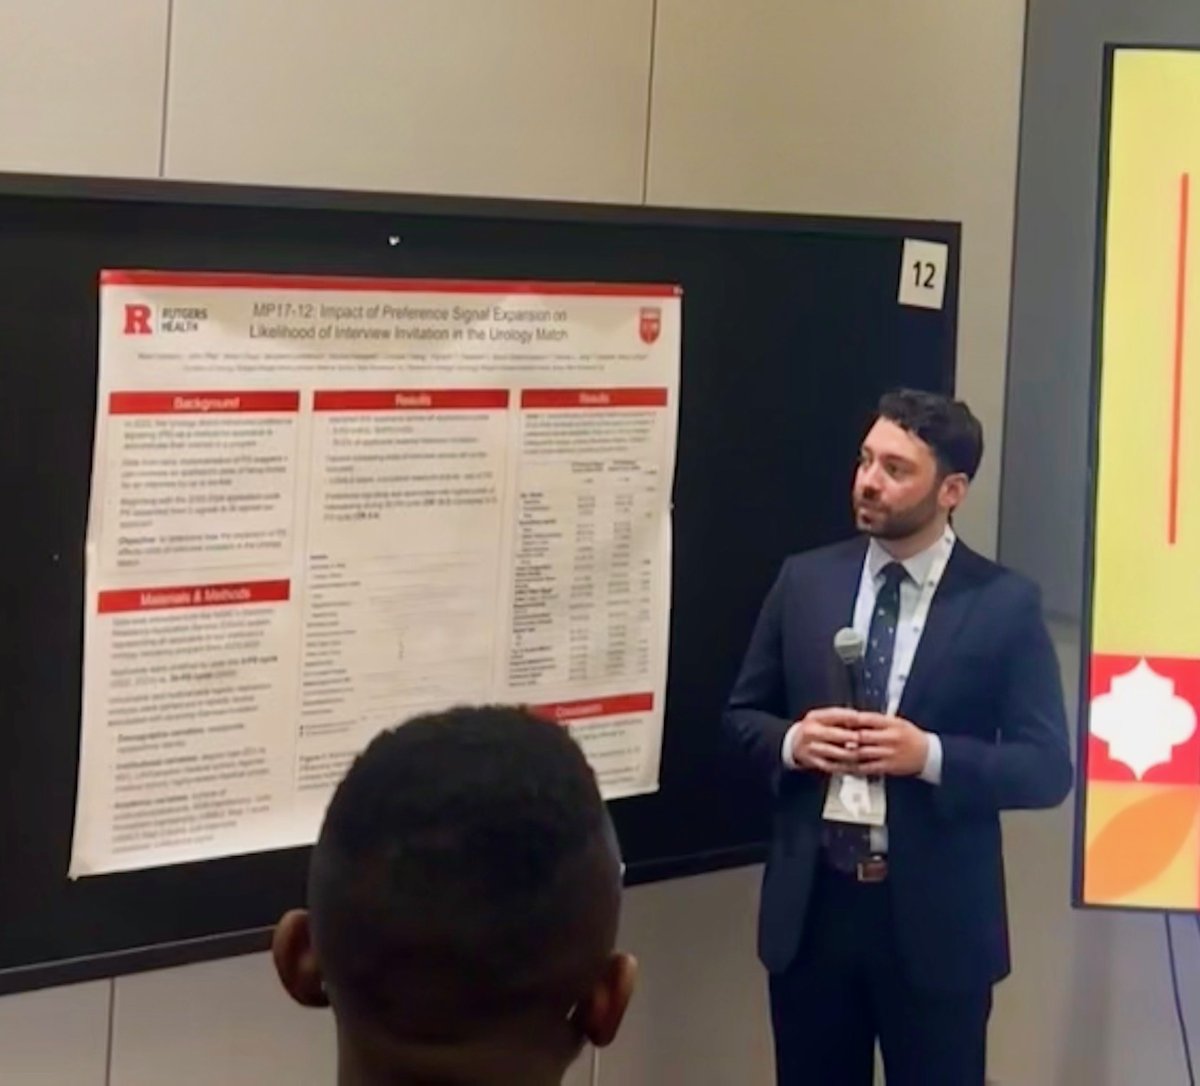 As always impressive work from Al Kaldany (@alainkaldany) - looking at changes in the match process as a function of preference signaling. Truly a model resident, GURS is lucky to have my dude! @rwjurology